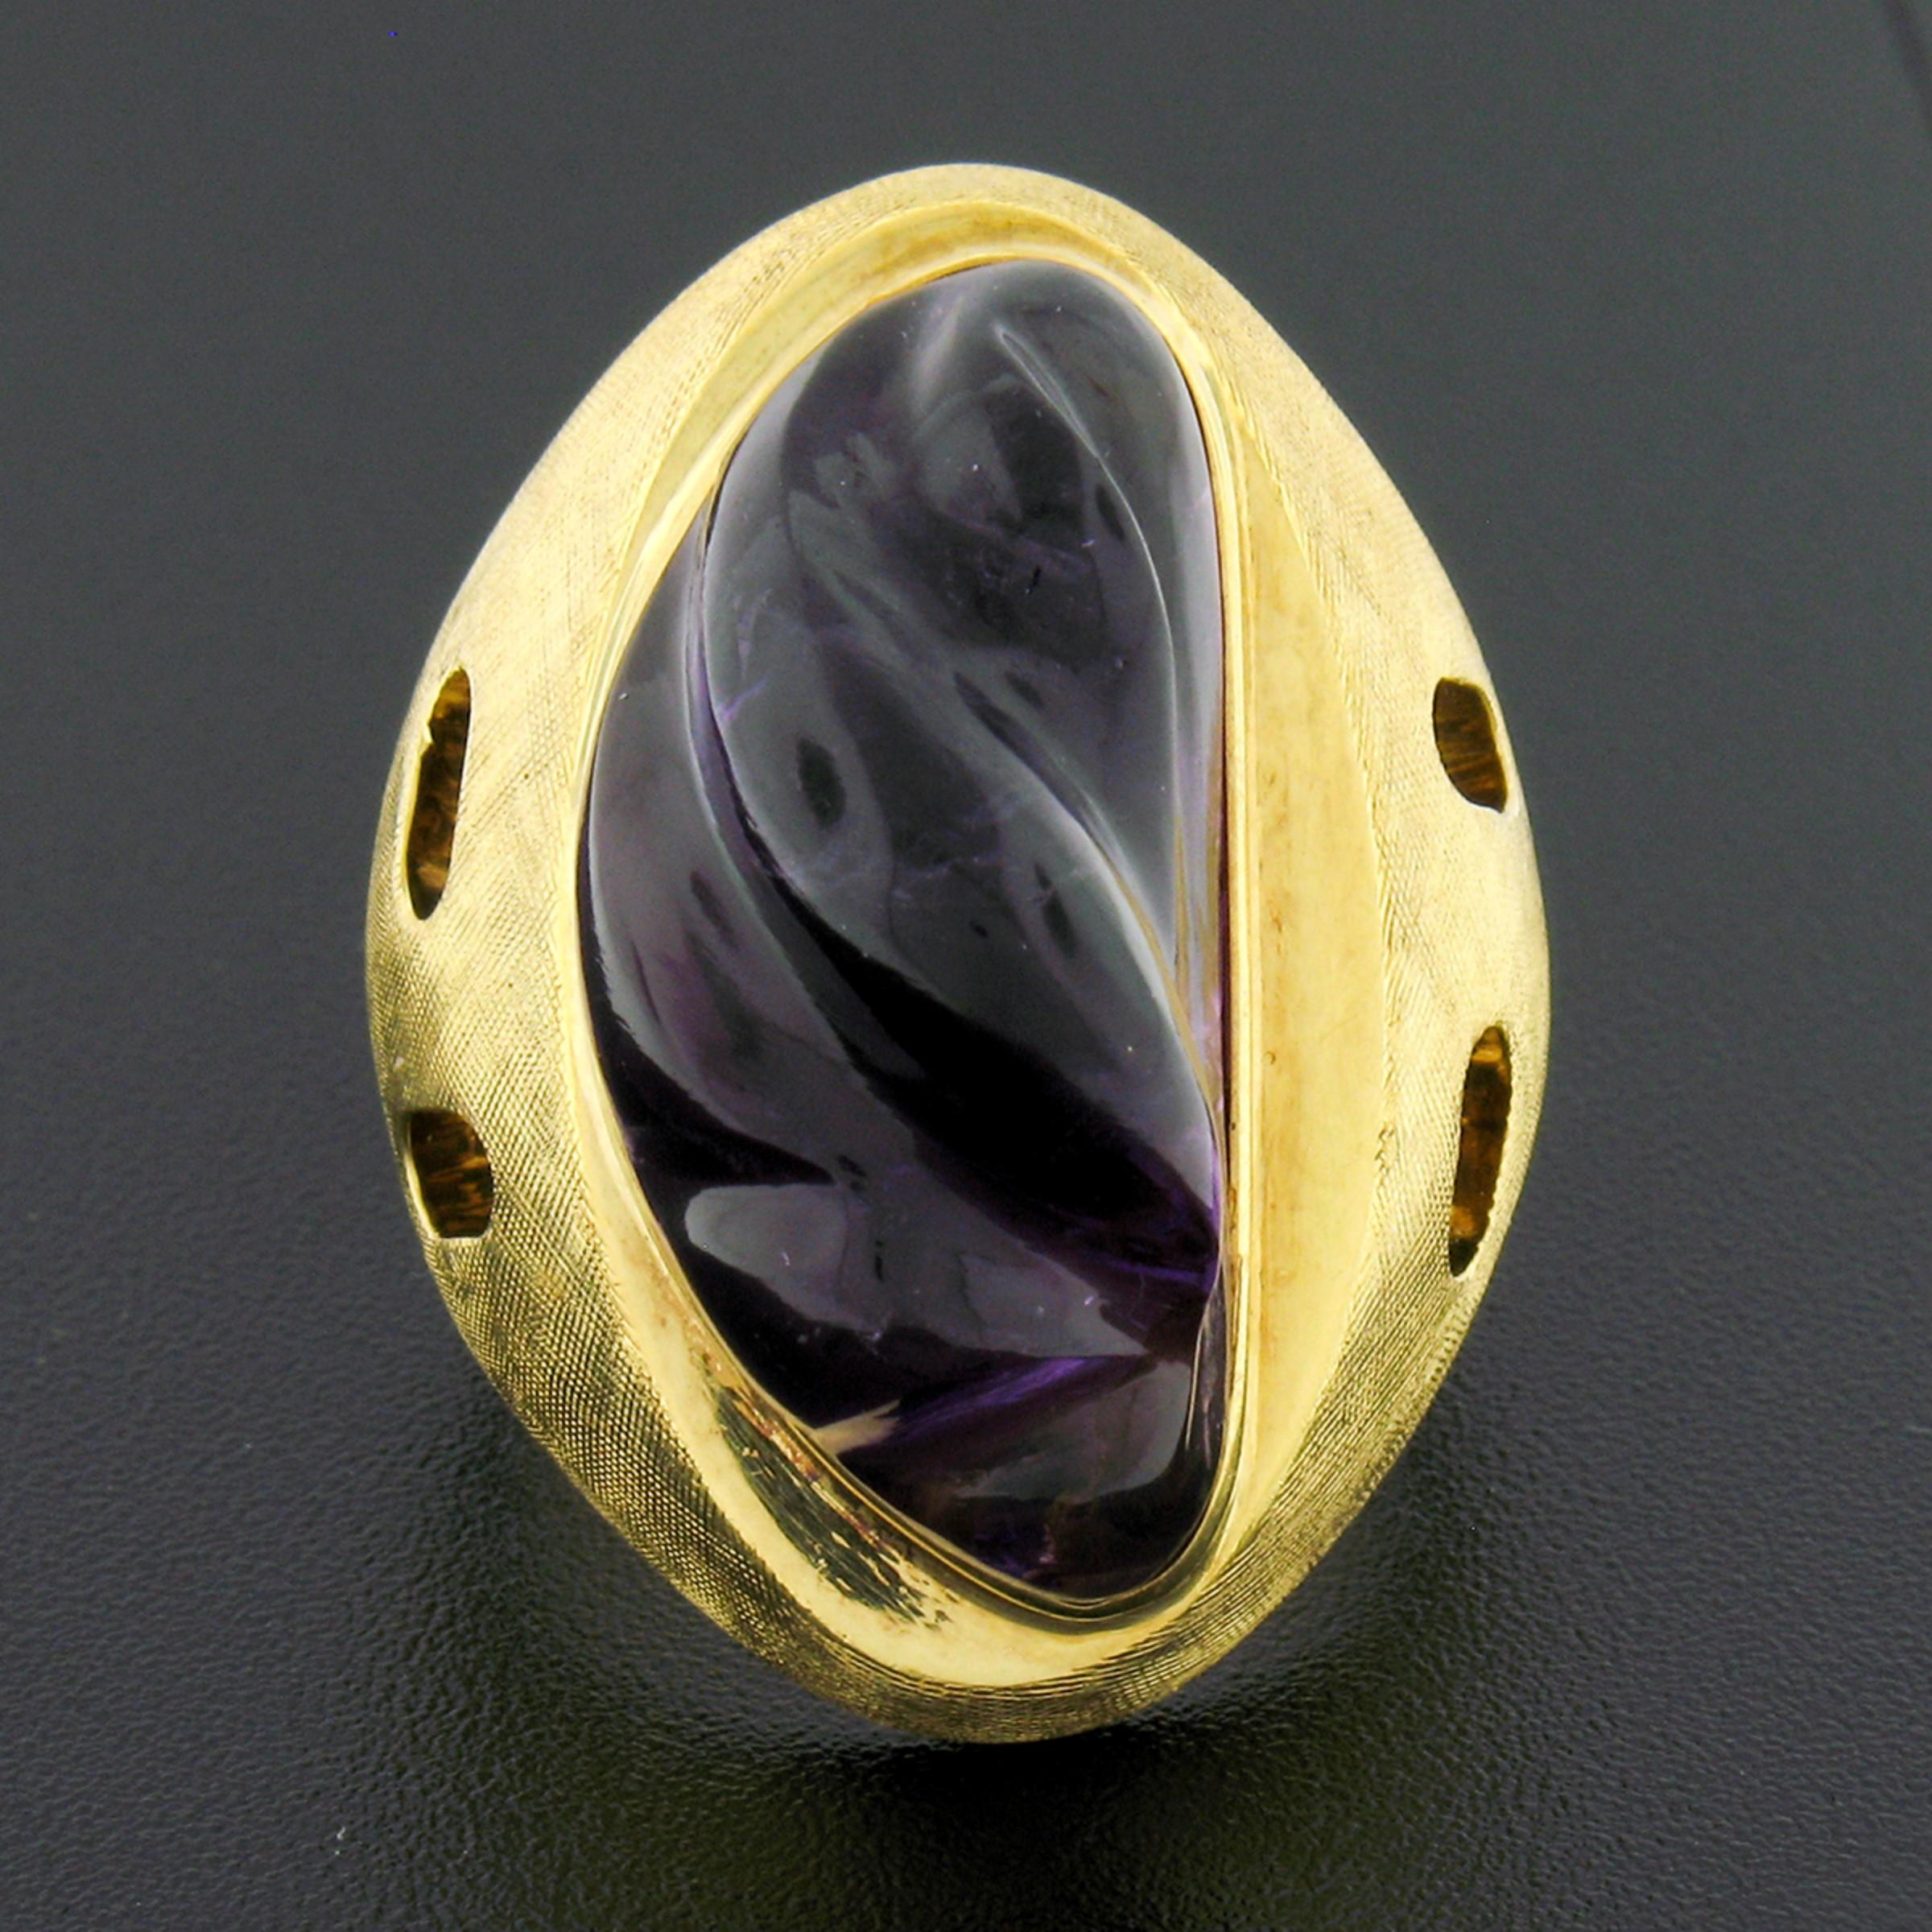 Here we have a beautiful, collectible, modernist ring crafted in solid 18k yellow gold and designed by the famous Brazilian designer Burle Marx. The ring features a large, carved cabochon, natural amethyst stone that displays the most lovely and